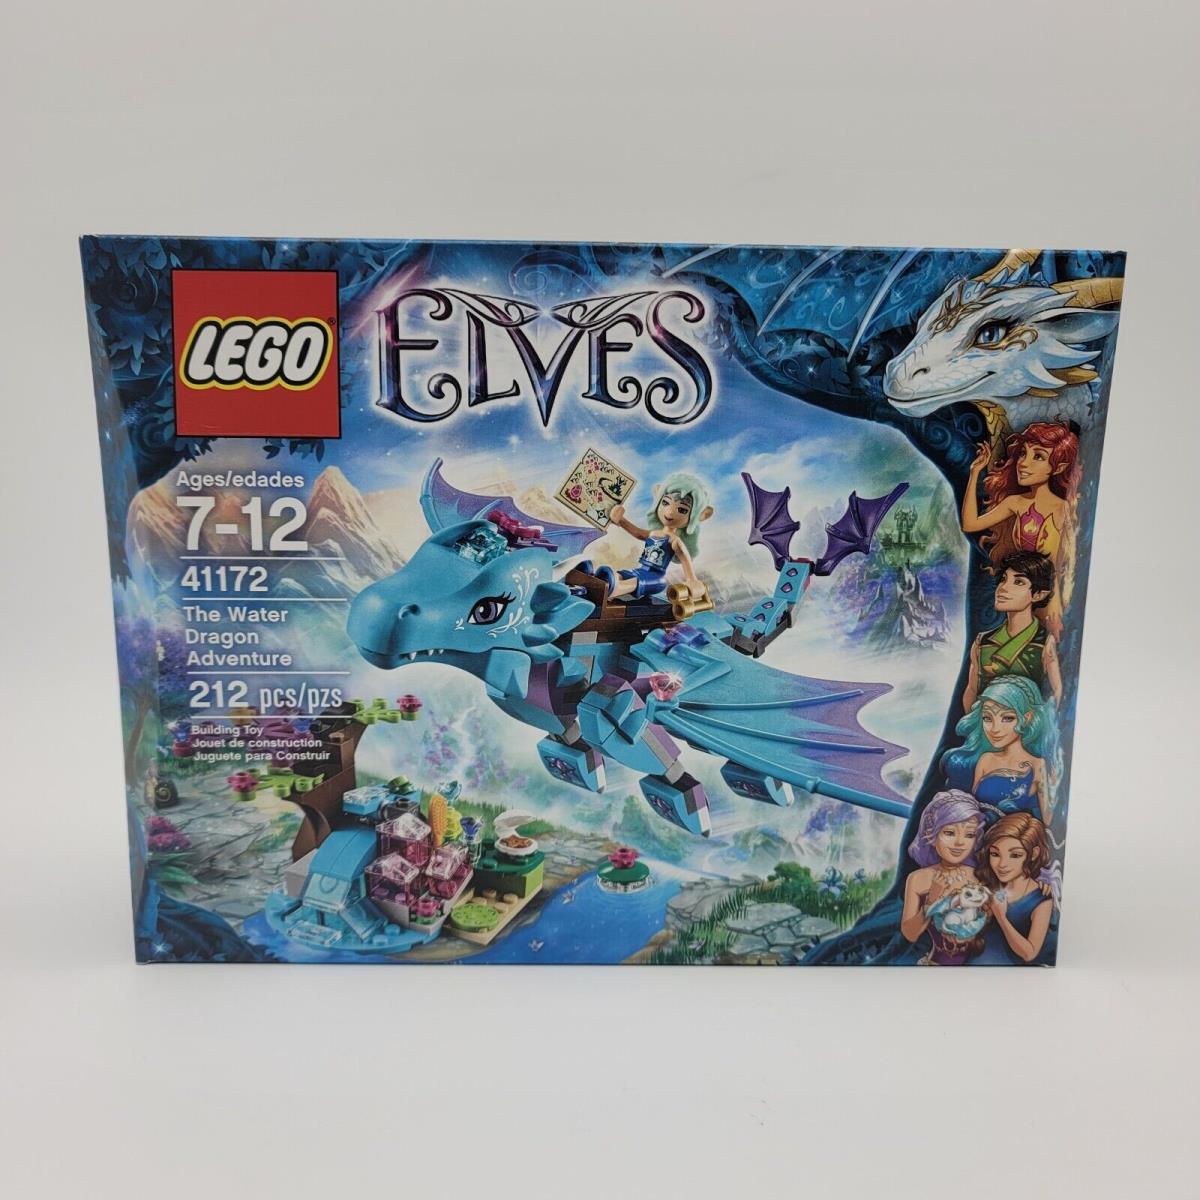 Lego Elves The Water Dragon Adventure 41172 Retired